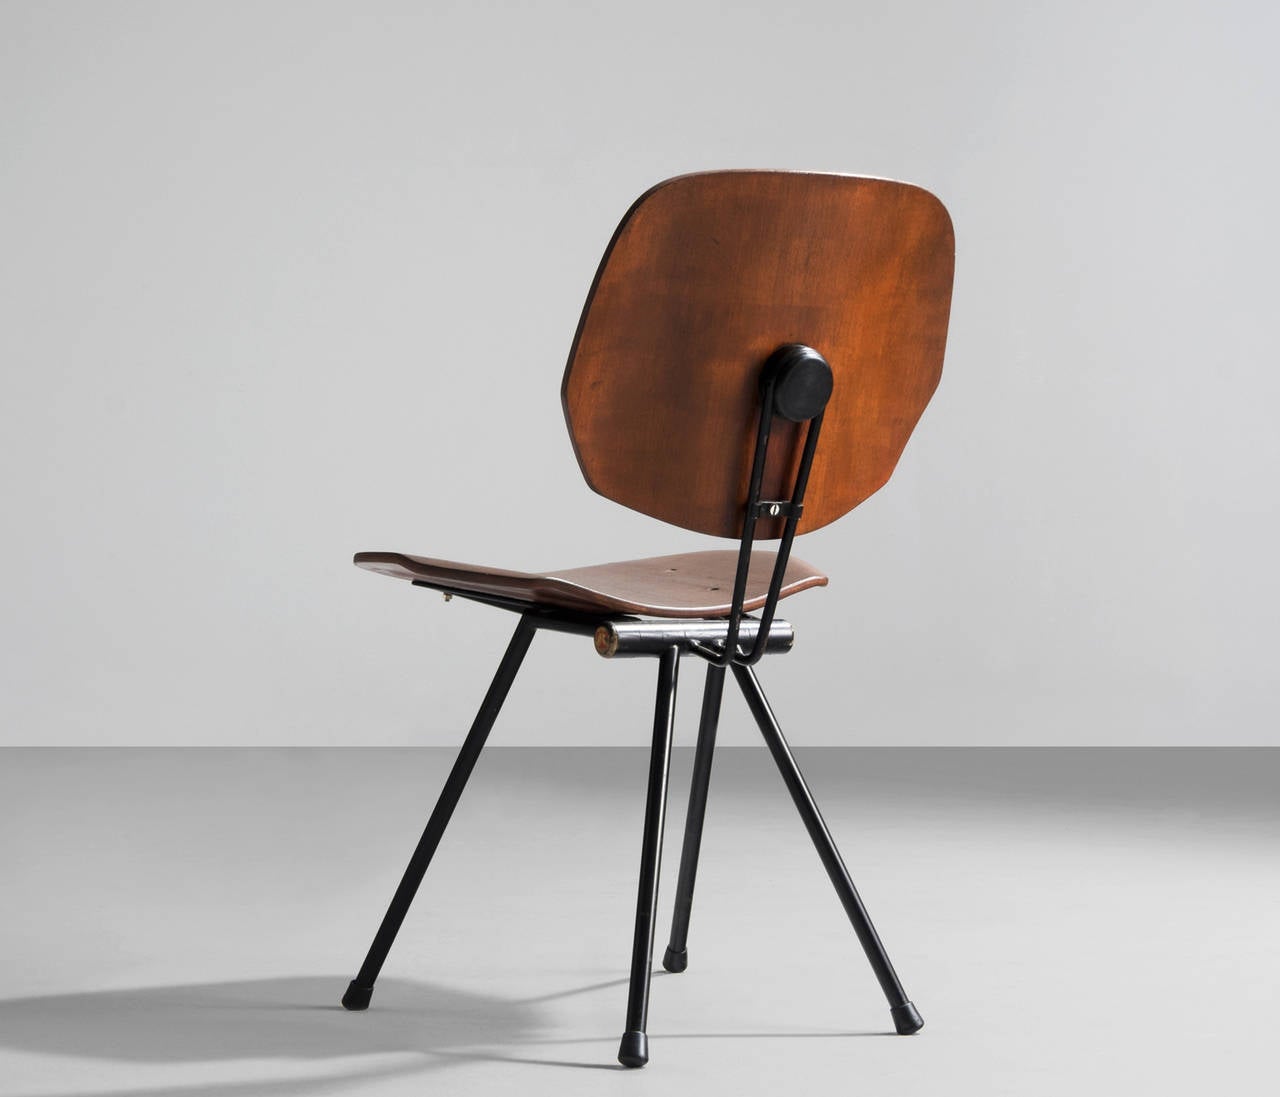 Osvaldo Borsani's 'S88' folding chair for Tecno designed in 1956, produced in 1957.

A fully folding chair with a metal frame. All the parts rotate around a single hinge joint. The seat and back are made of moulded plywood.

Always alert to the